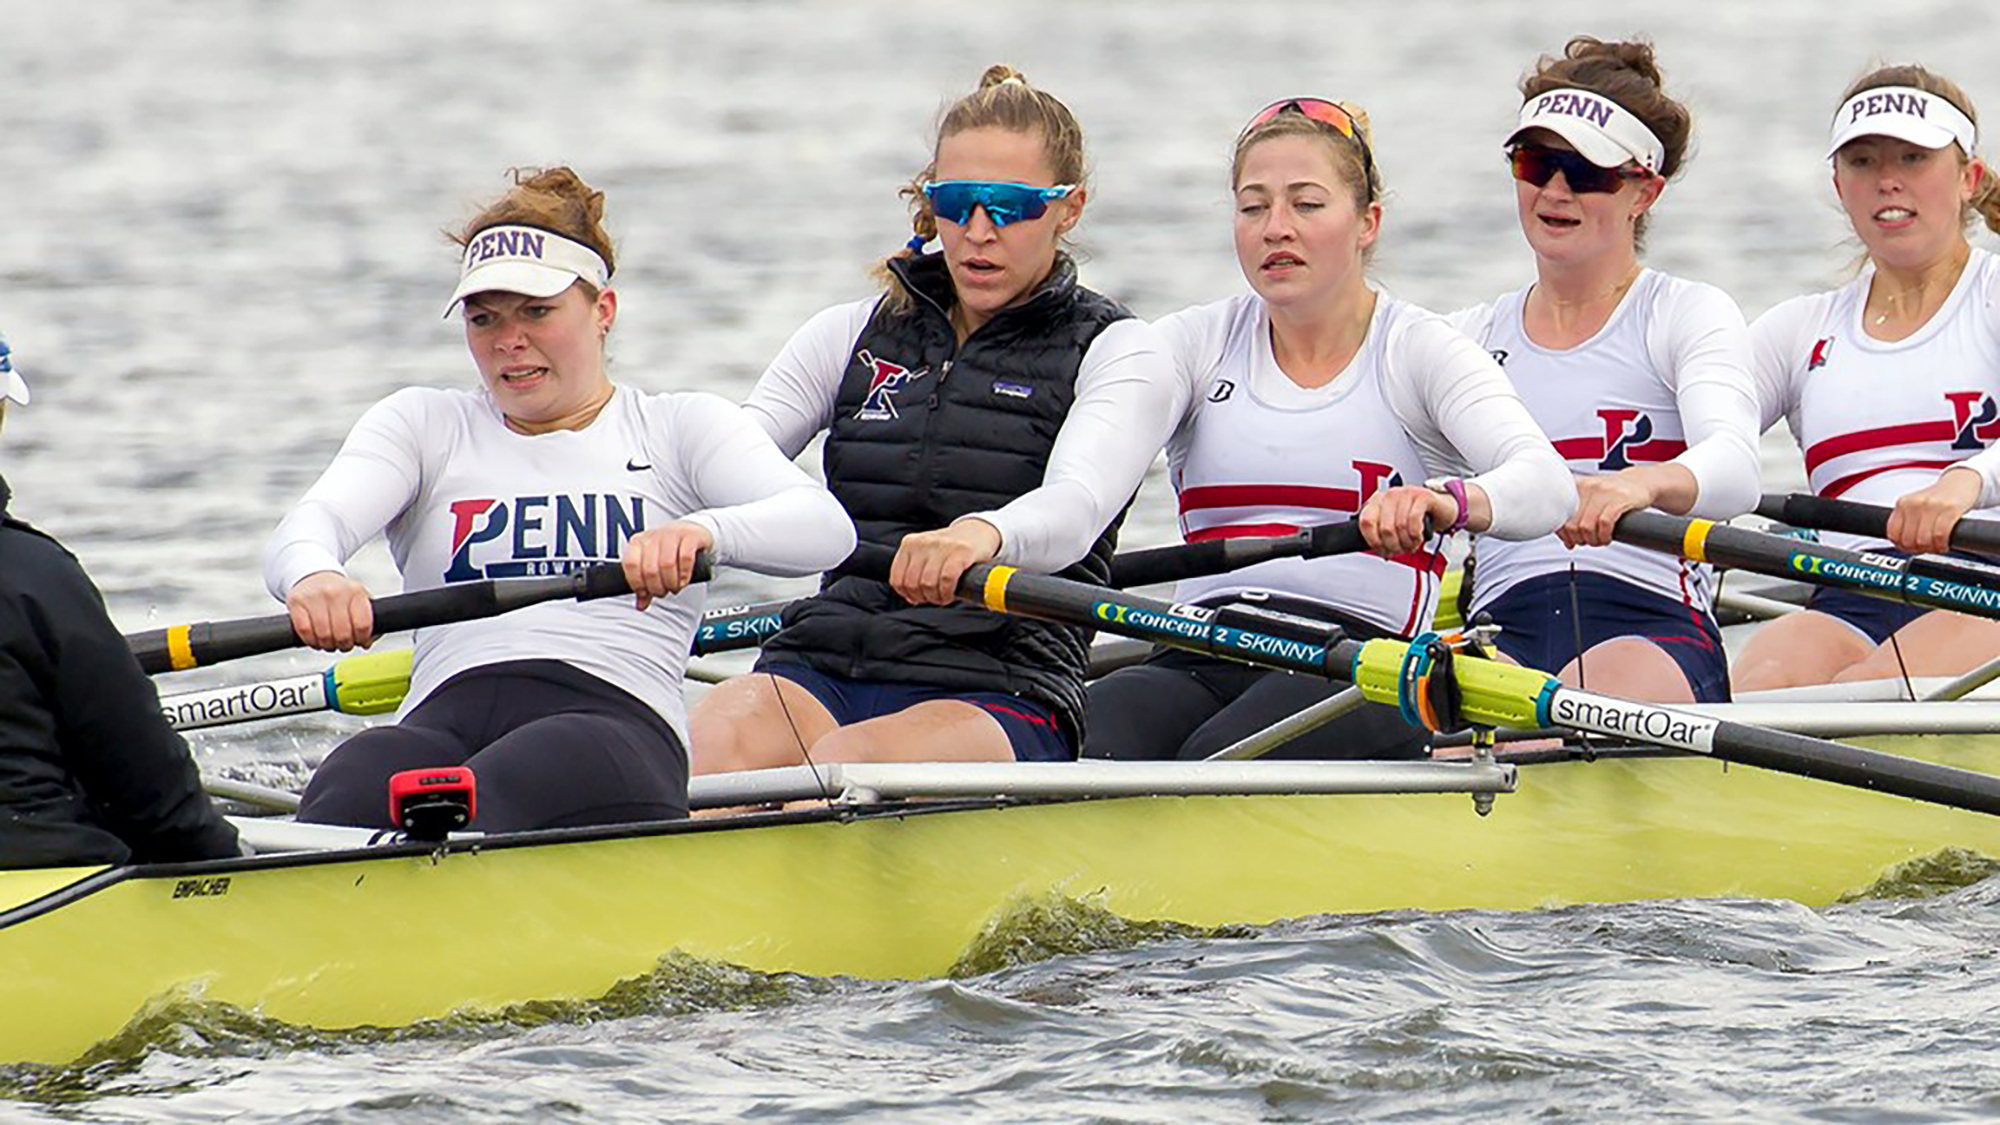 Salmons (in sunglasses) competes with the Penn women’s rowing team during her undergraduate days.